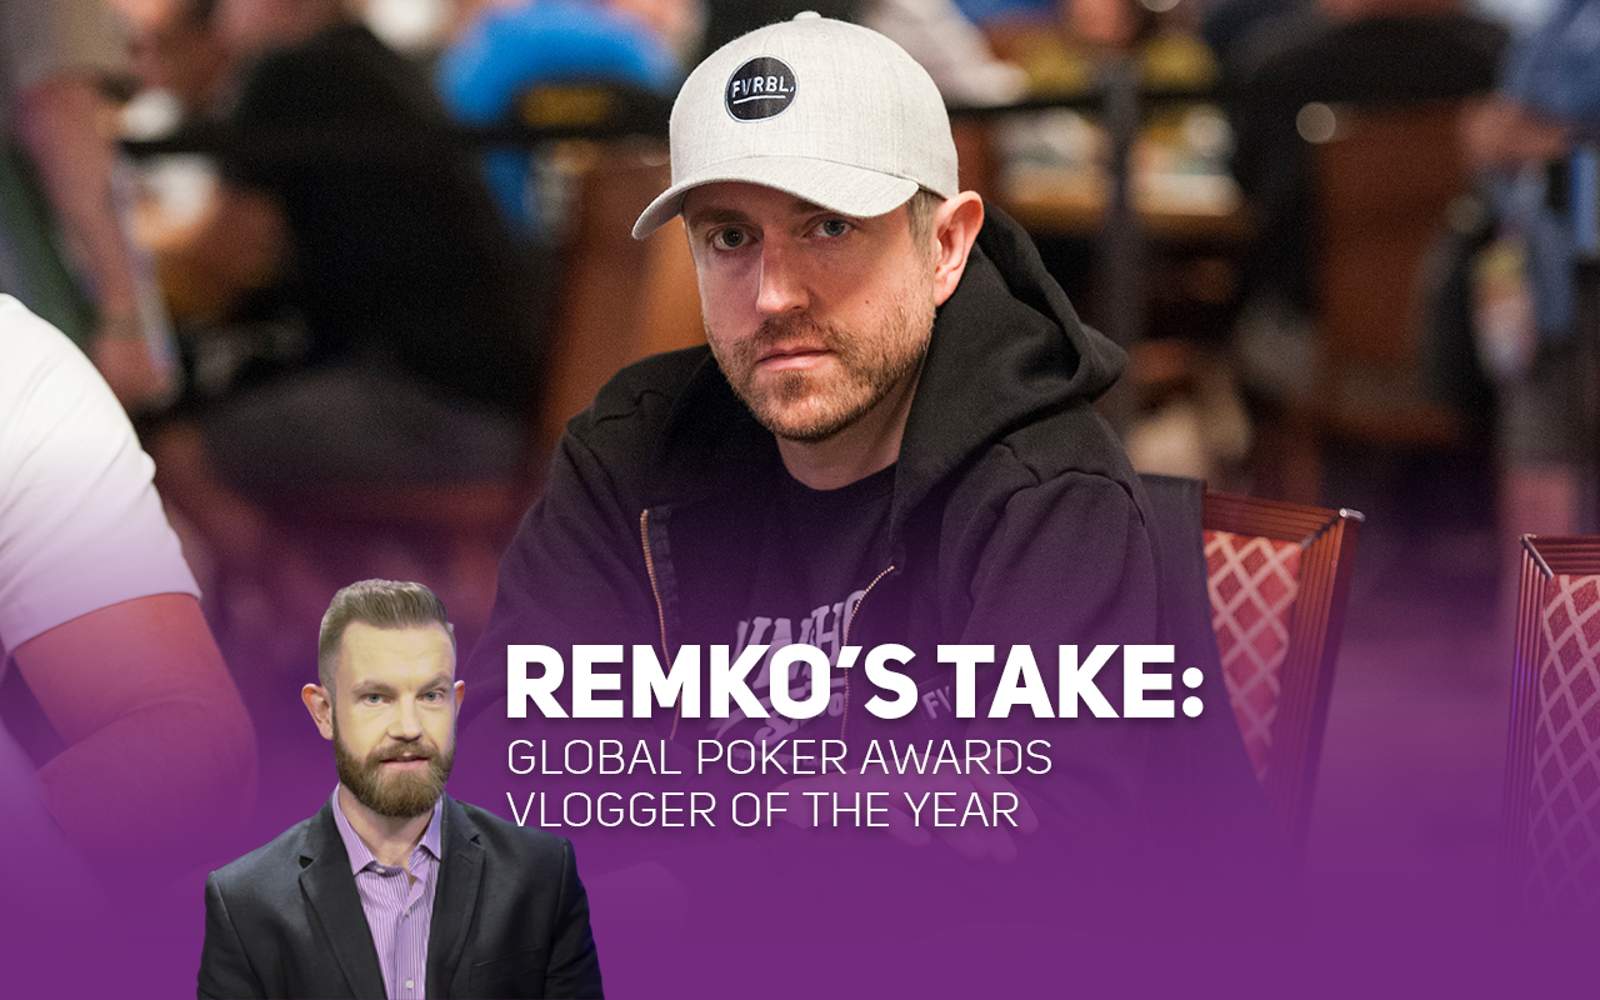 Remko's Take: Global Poker Awards Vlogger of the Year